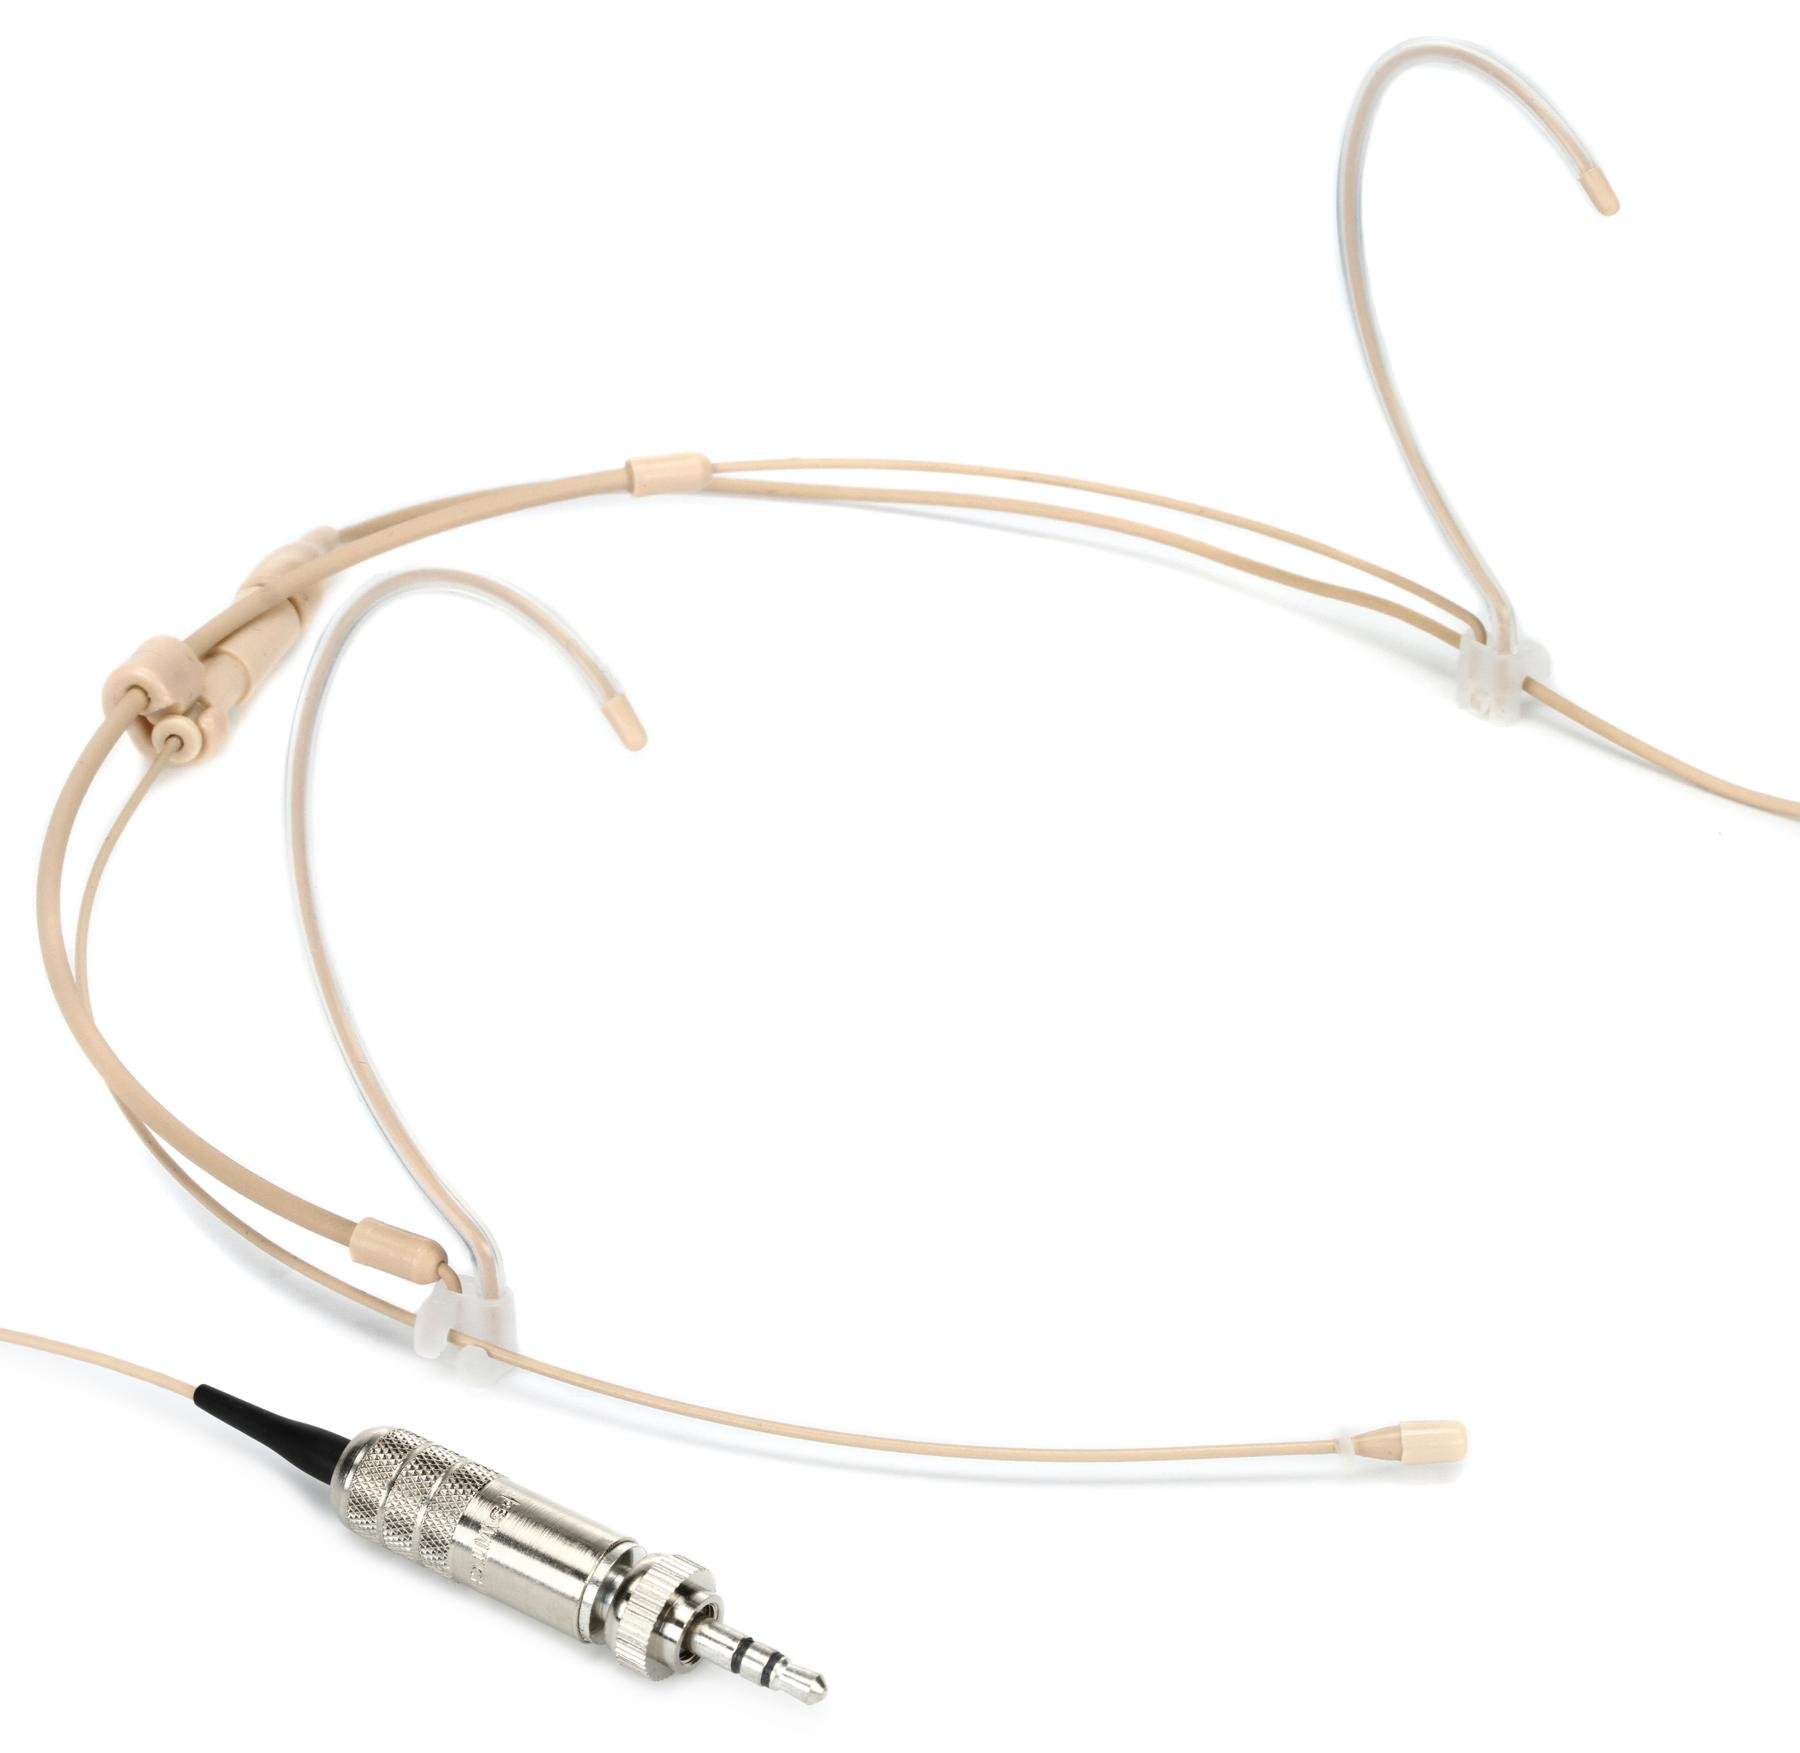 Light Beige Countryman H6OW6LSR  H6 Omnidirectional Wireless Headset Microphone for Sennheiser Transmitters